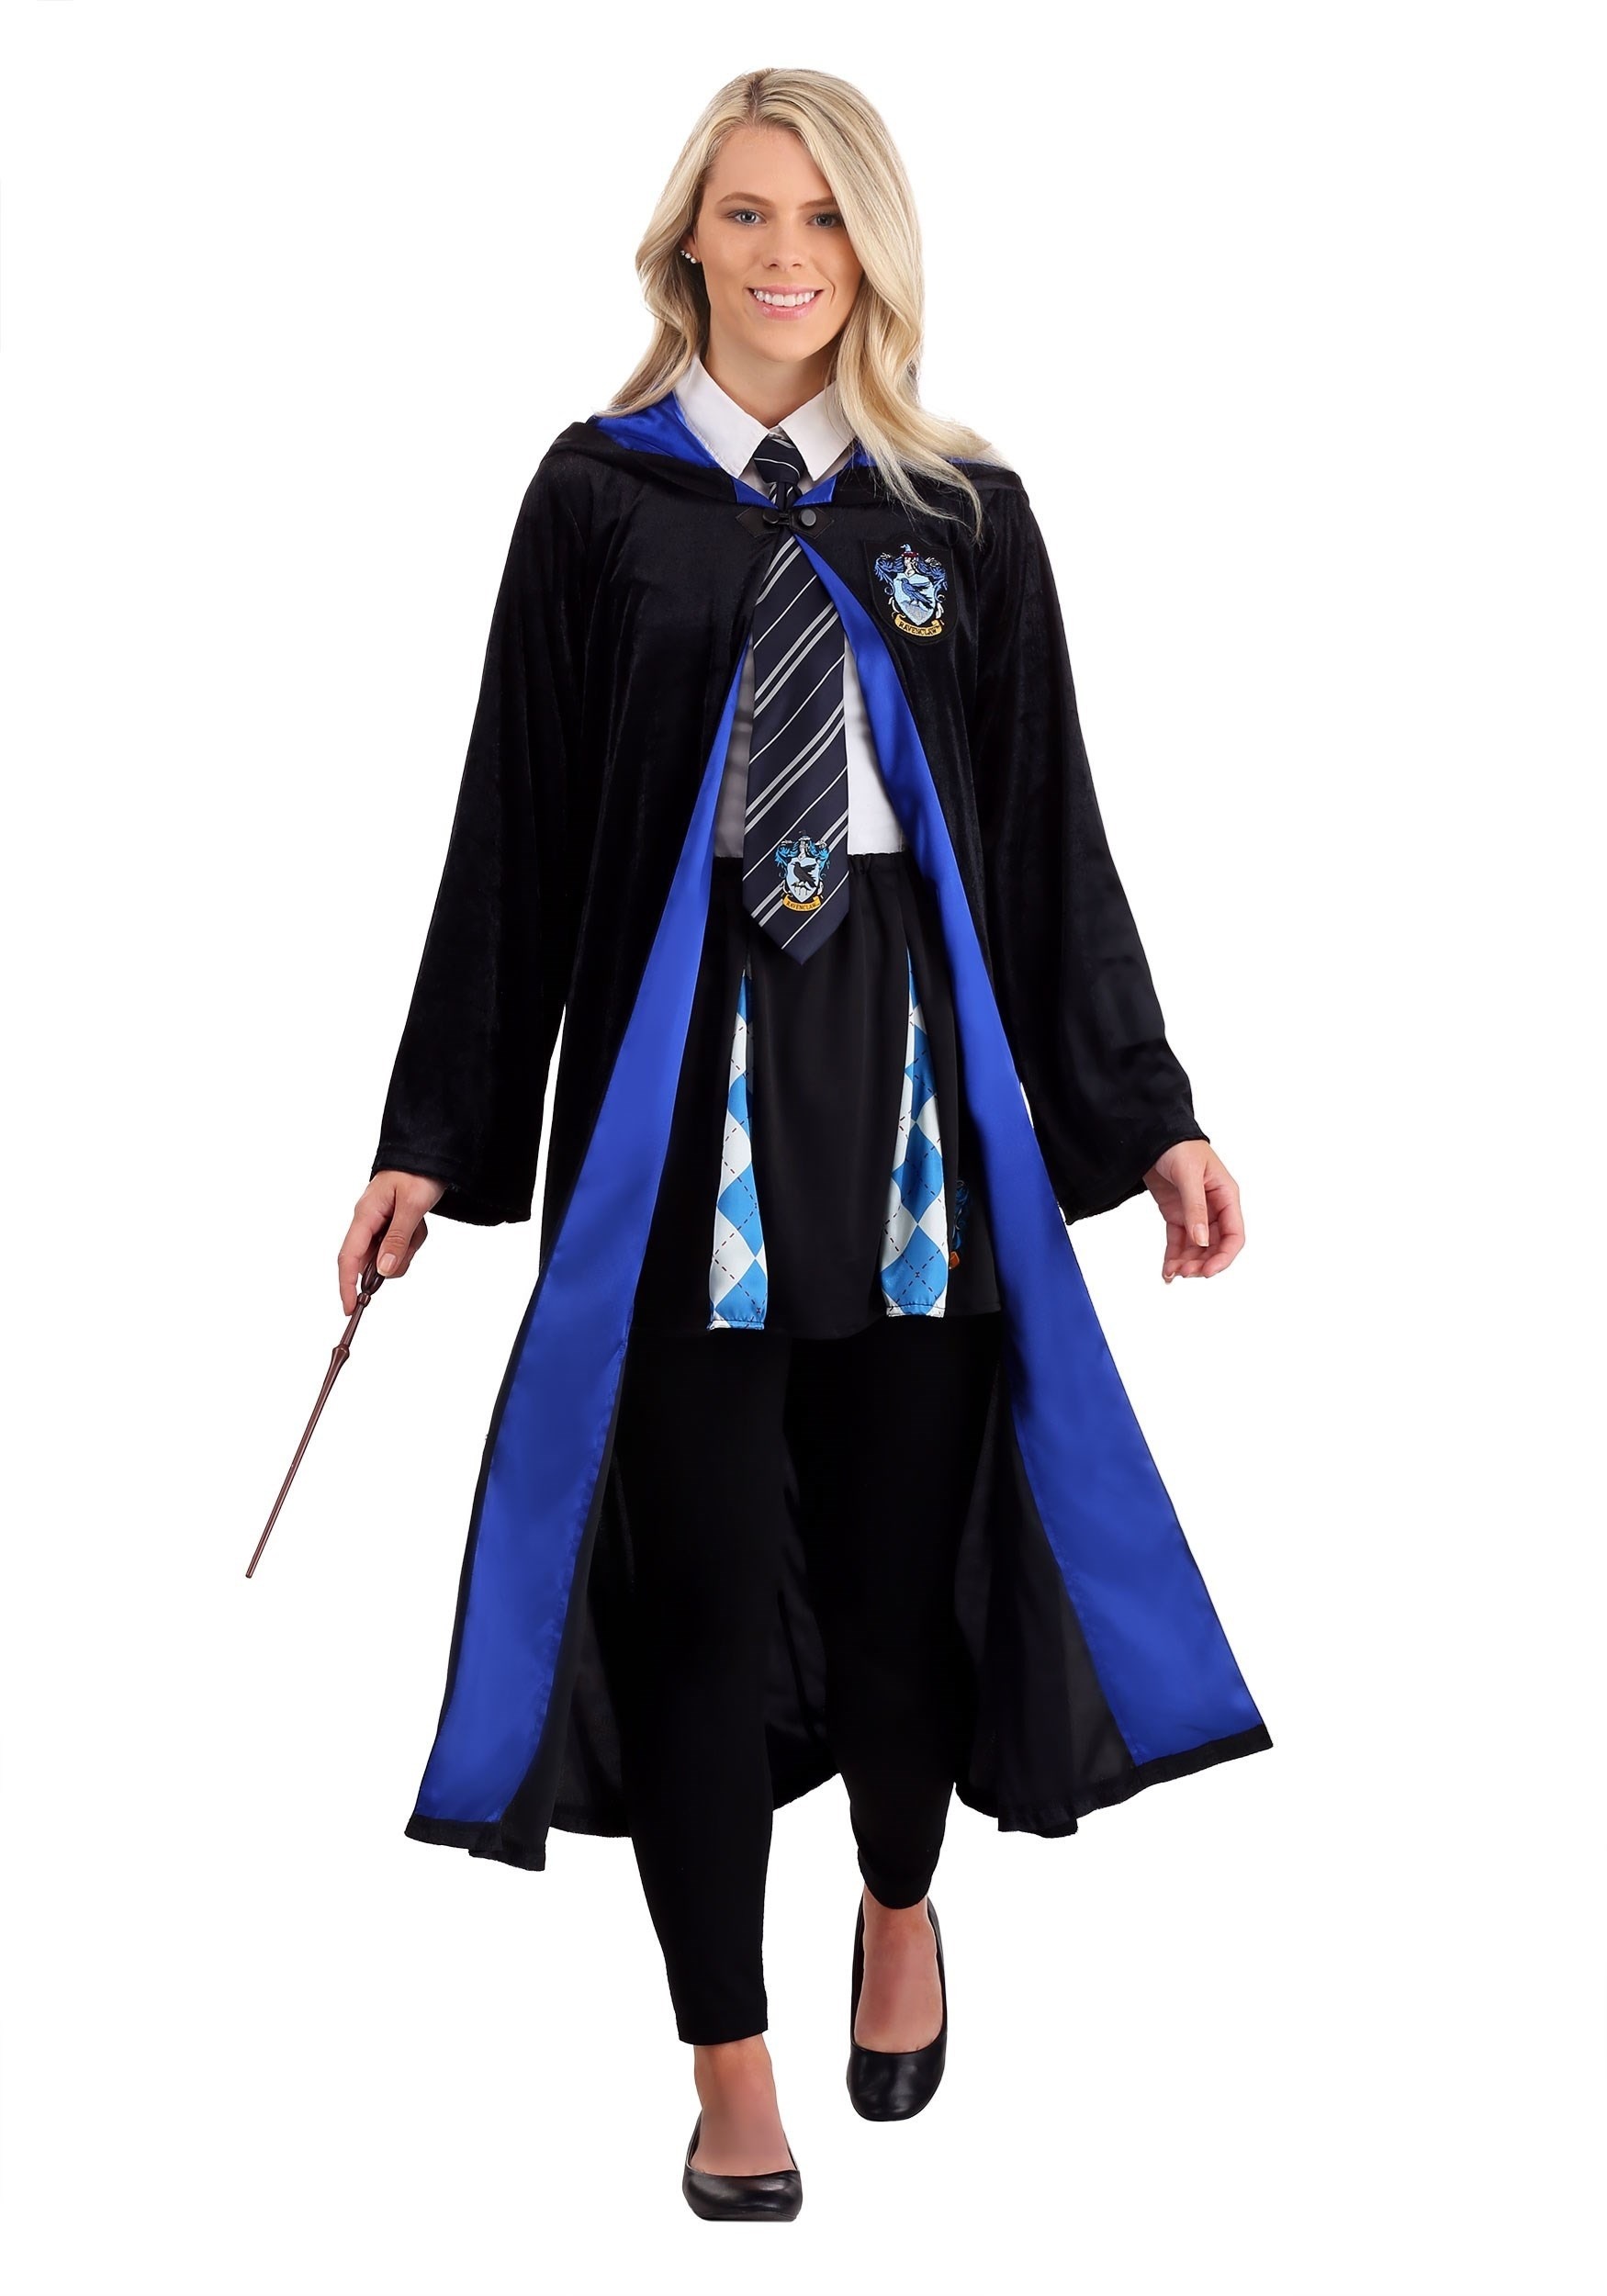 Must Have Adult Harry Potter Deluxe Hufflepuff Robe Costume From Jerry Leigh Fandom Shop - blue jedi robes roblox